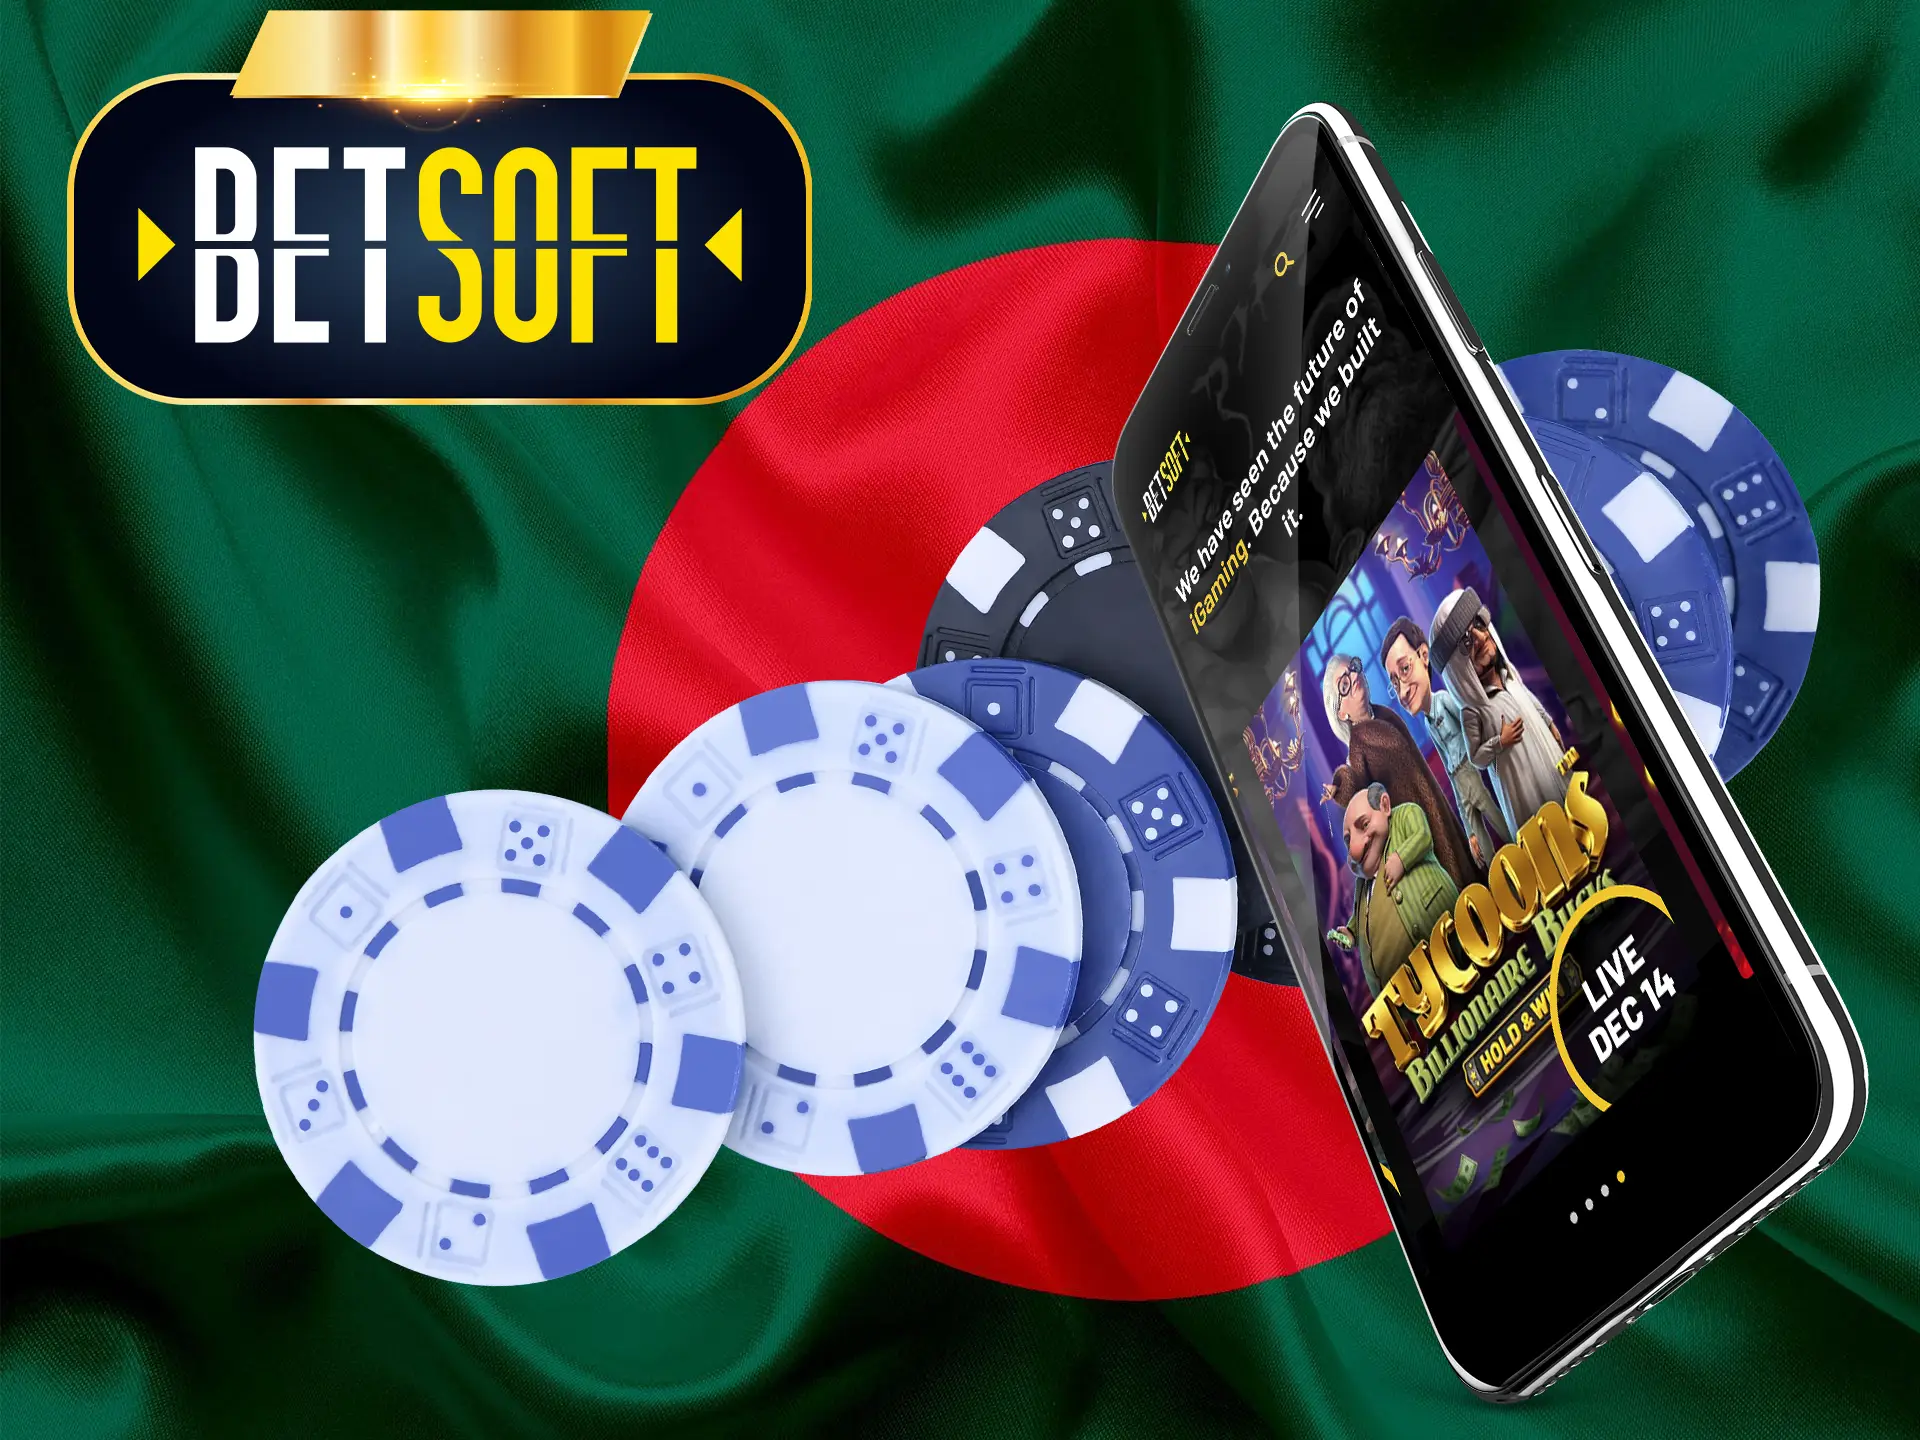 Betsoft operates legally in Bangladesh as evidenced by regulatory licenses.